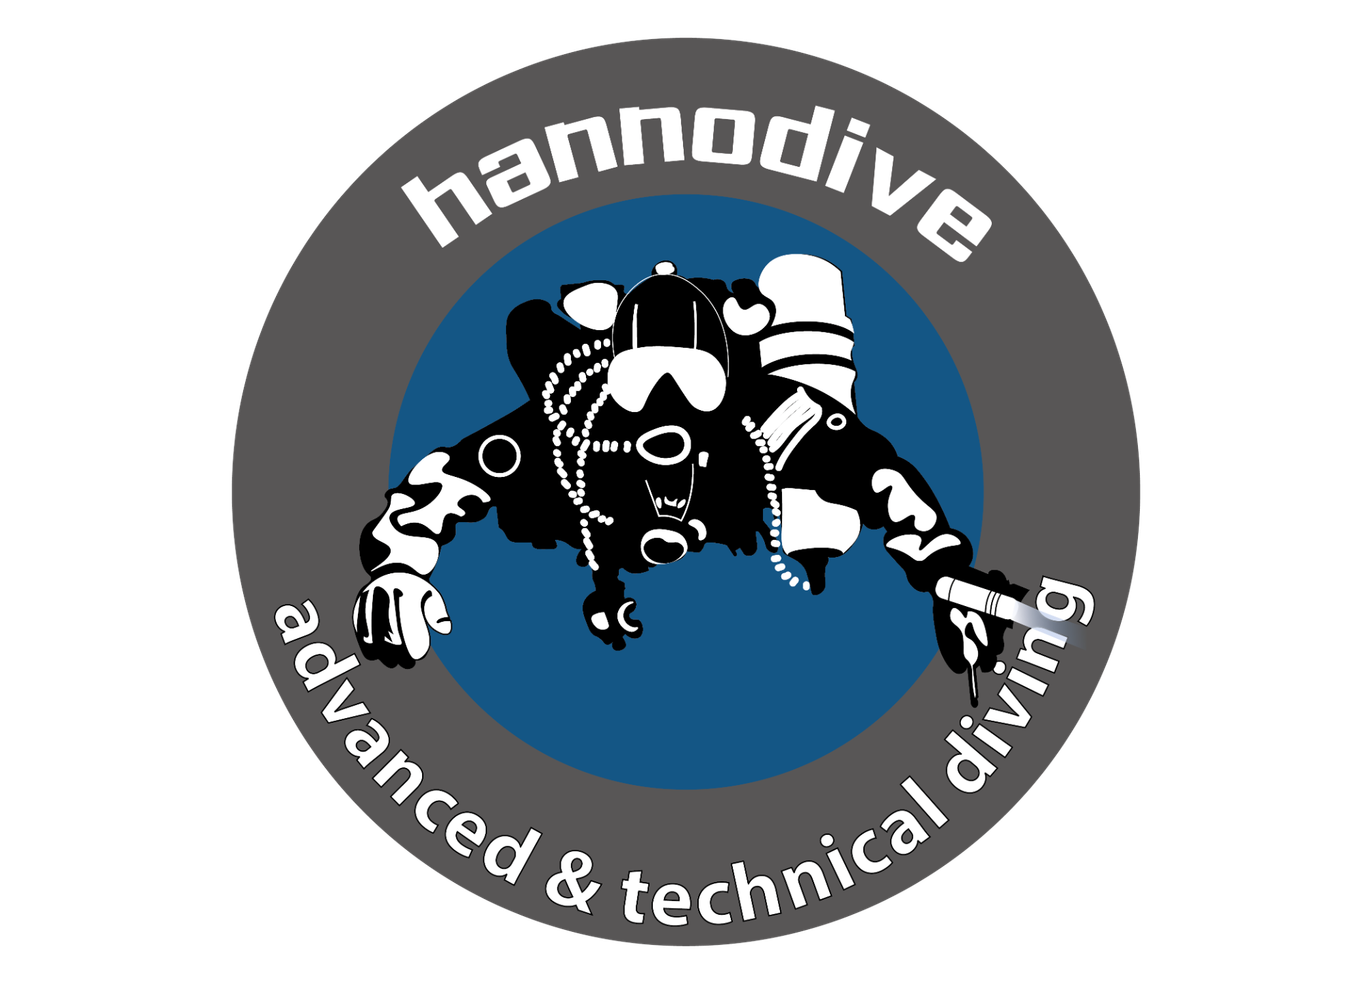 Tauchschule Hannodive in Hannover